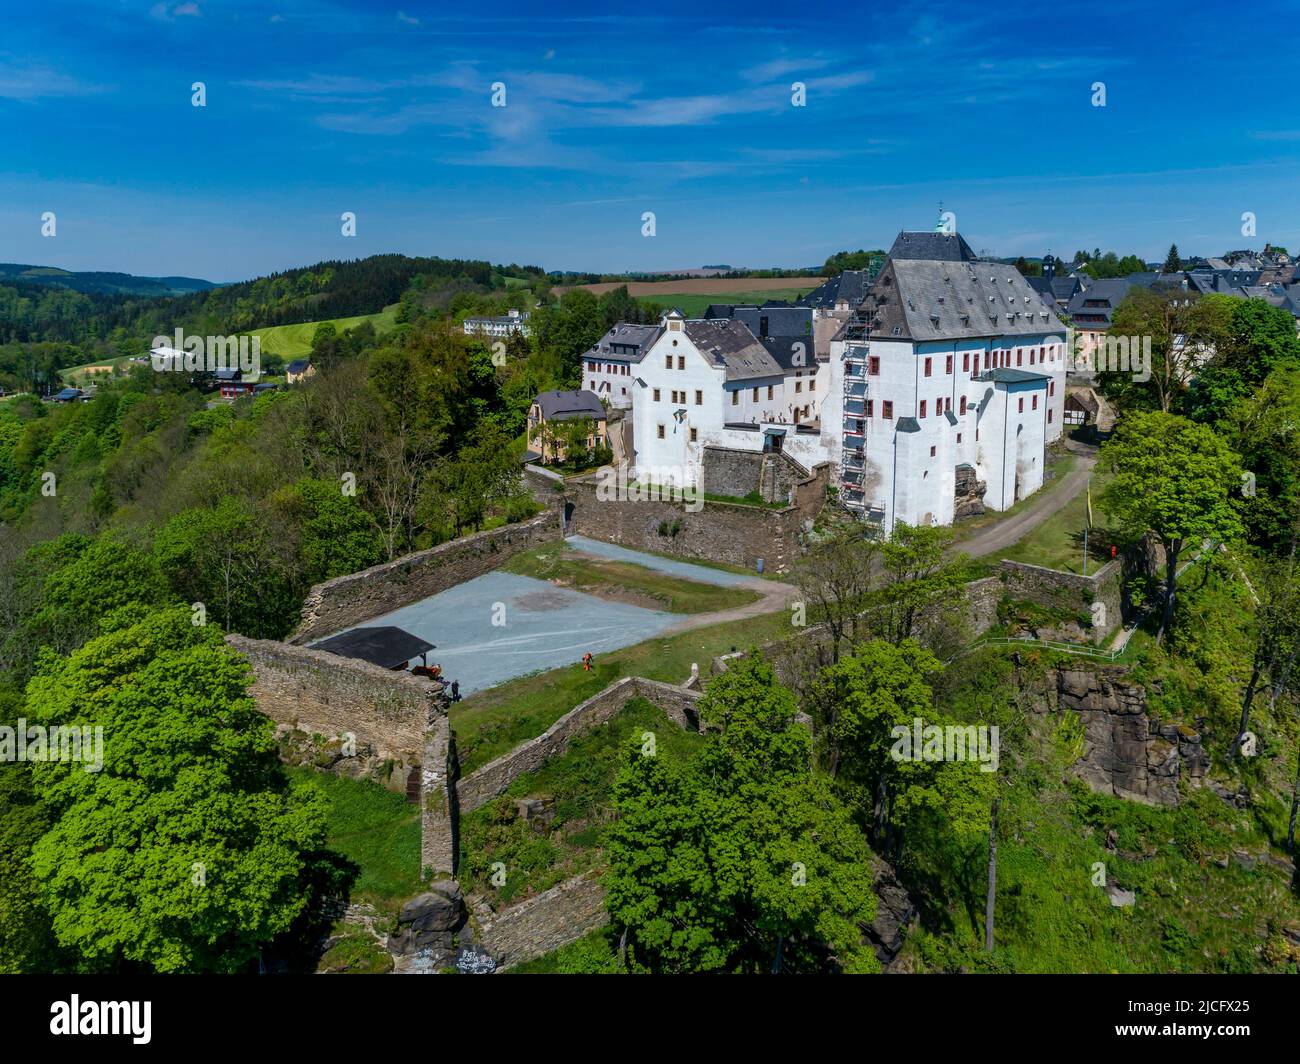 Wolkenstein Castle in the Ore Mountains: The Wolkenstein Castle is located in a scenic setting. The castle rises almost 80 meters above the Zschopau valley. Stock Photo